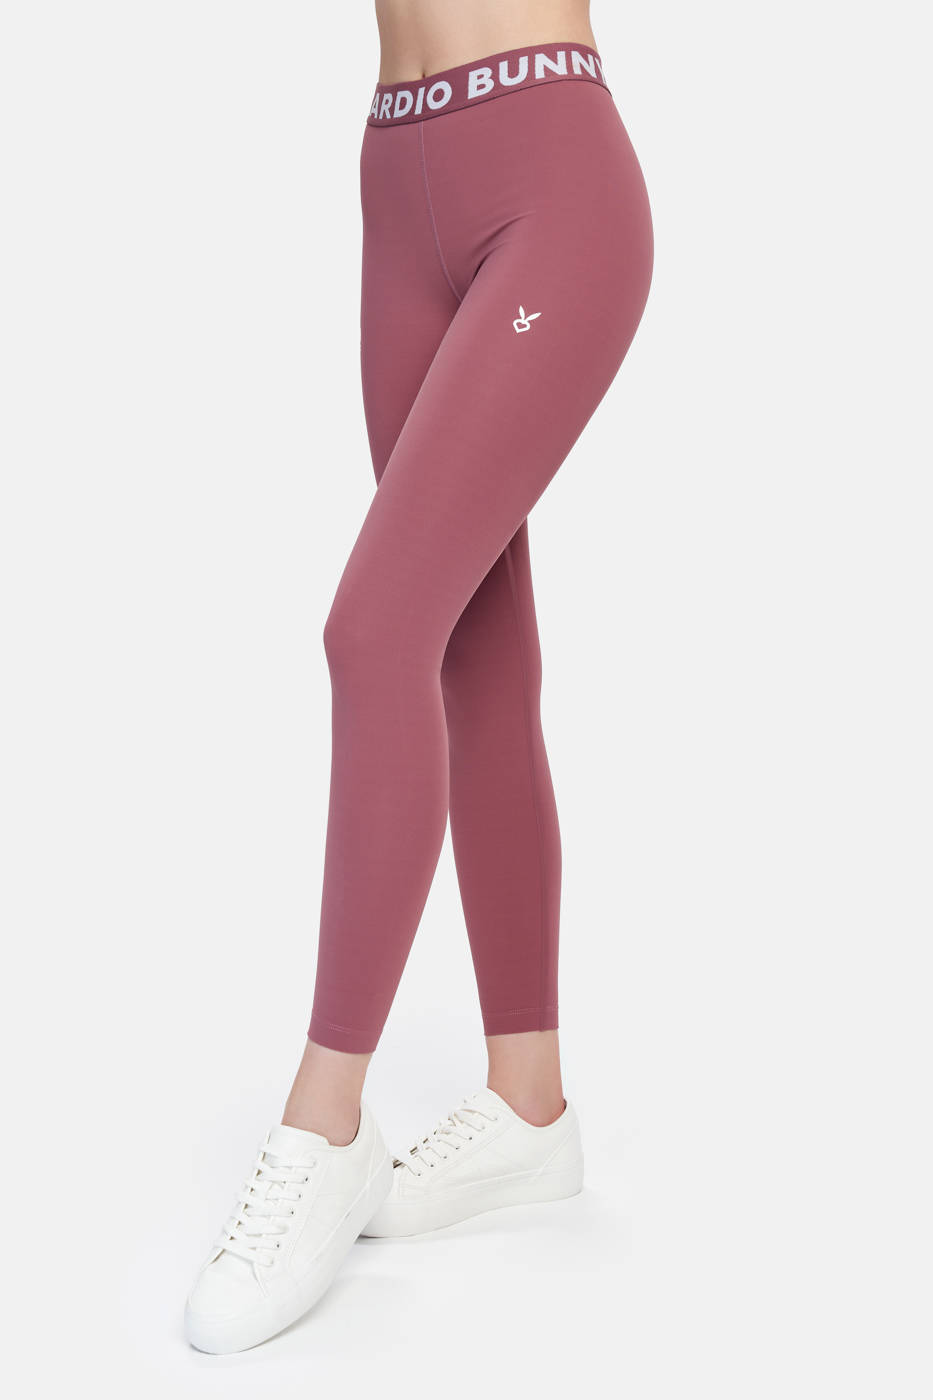 Buffbunny Rosa Leggings Pink Size M - $45 (33% Off Retail) - From Courtney